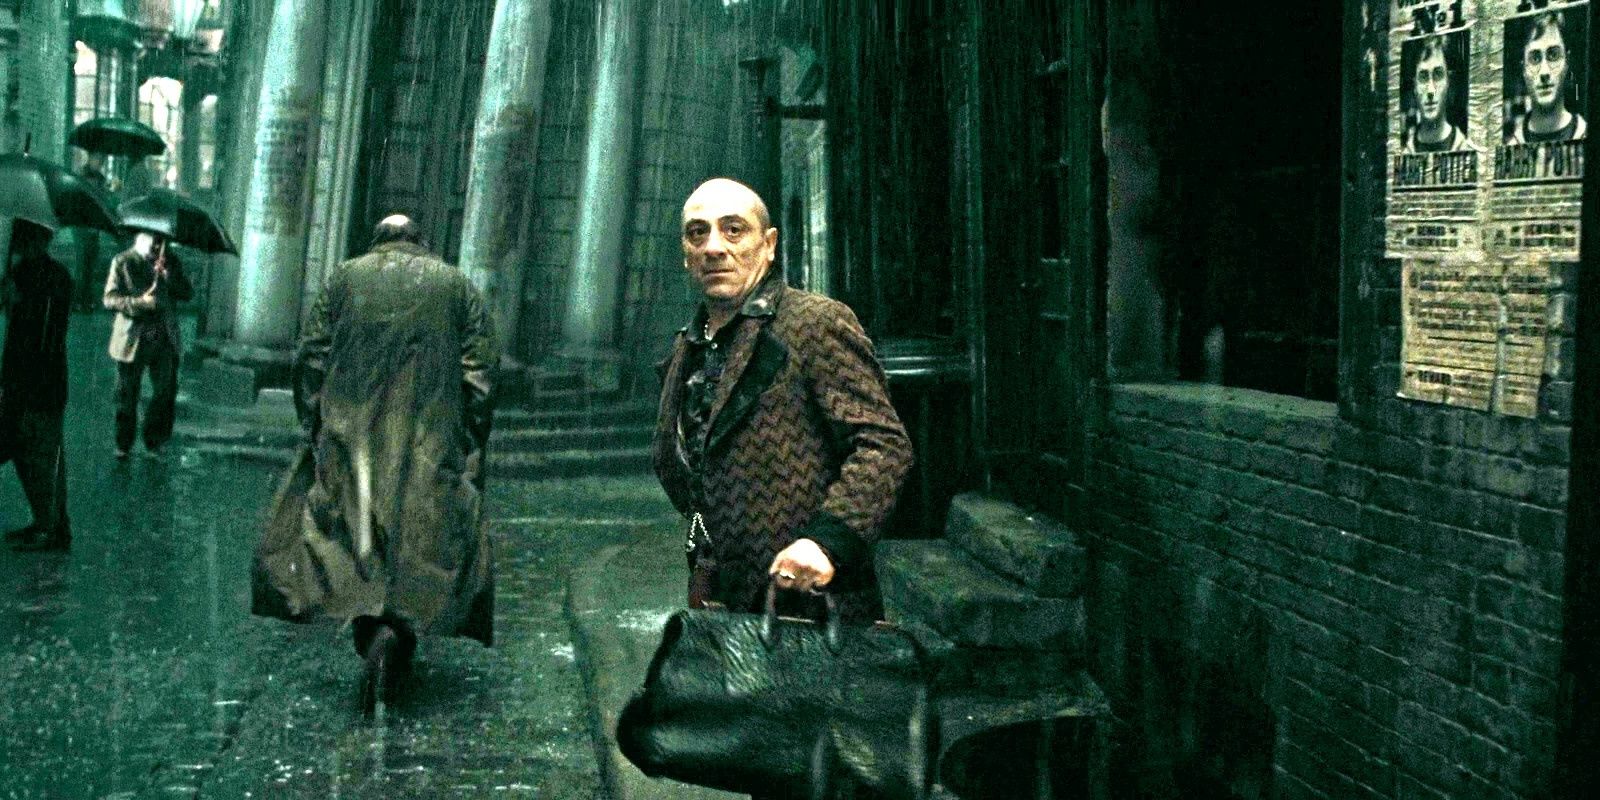 10 LowKey Villains In Harry Potter Everyone Forgets About